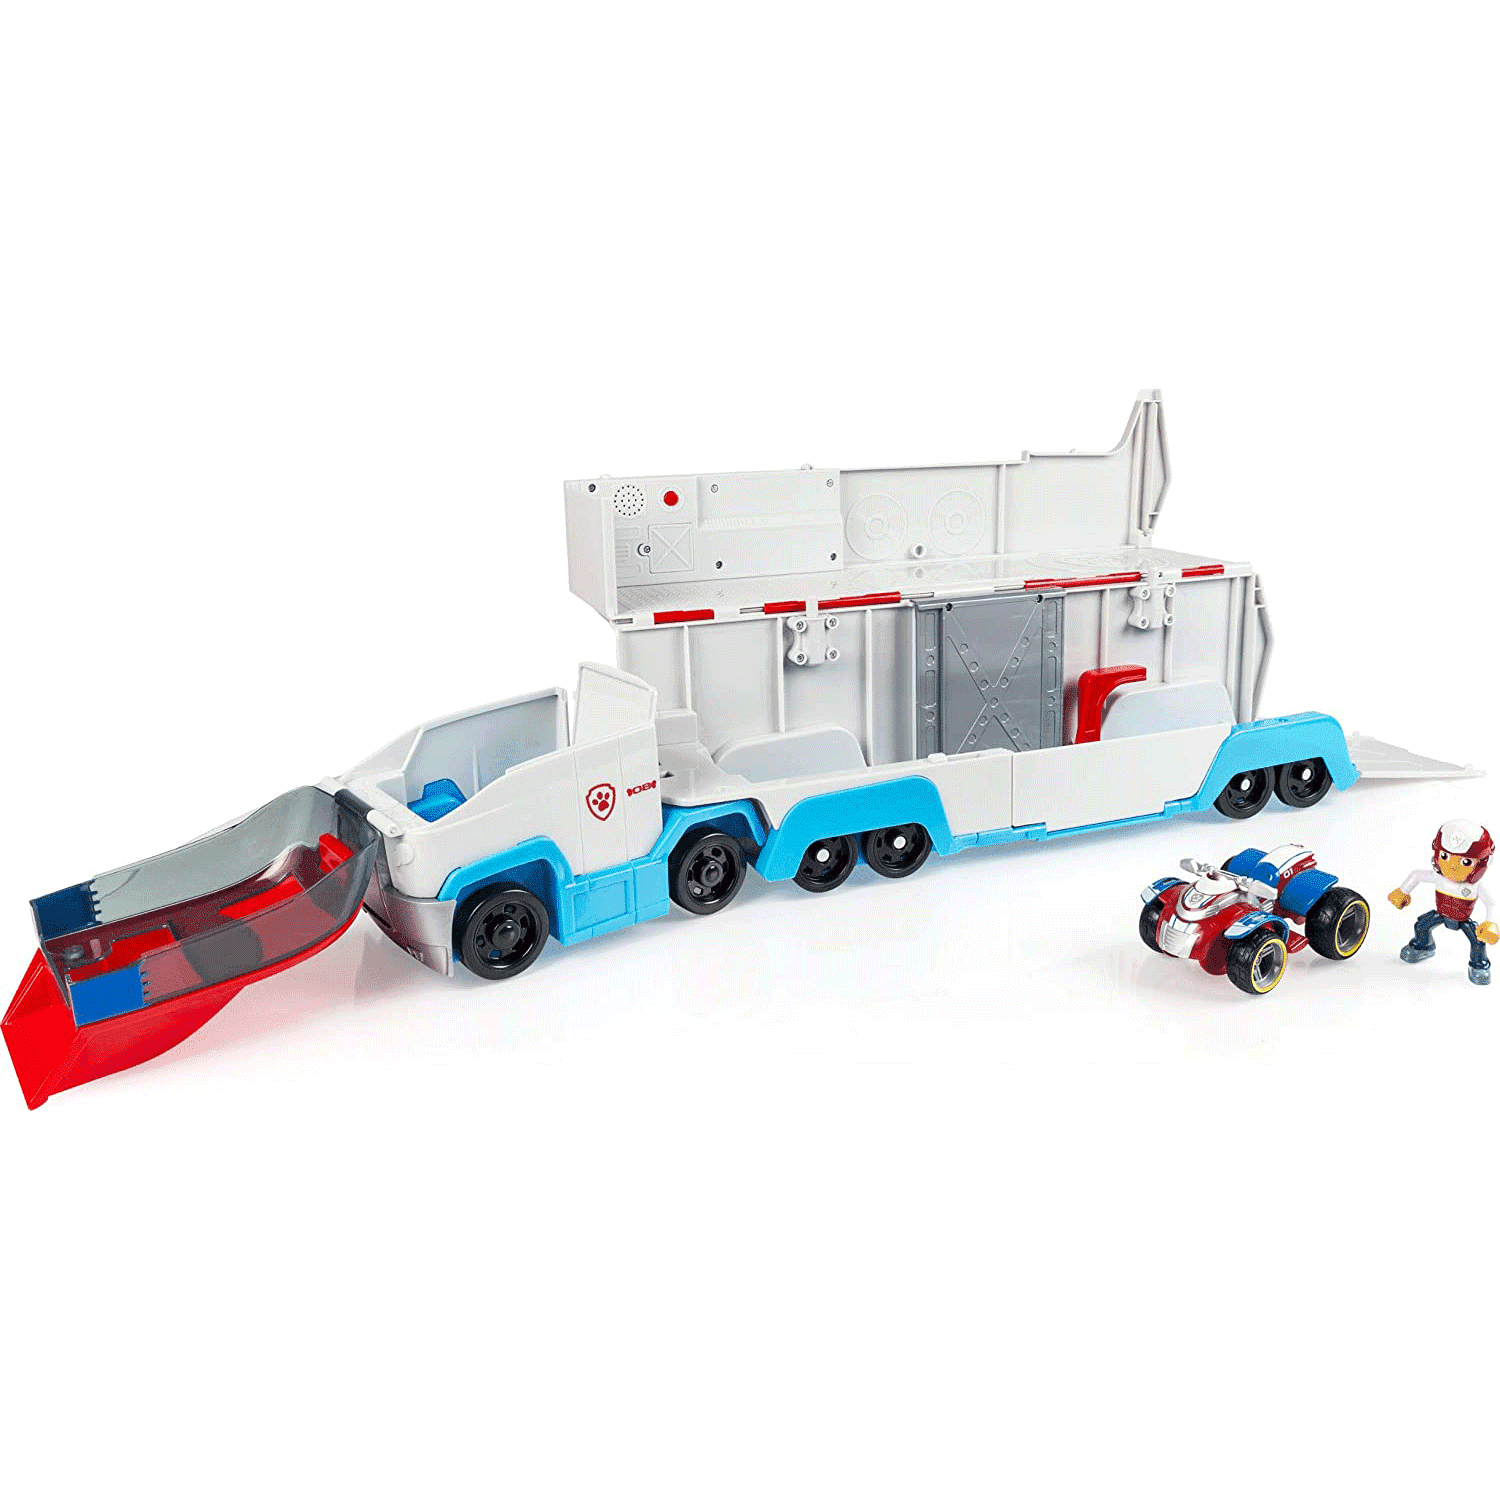 PAW Patrol PAW Patroller Rescue and Transport Truck Ryder Vehicle